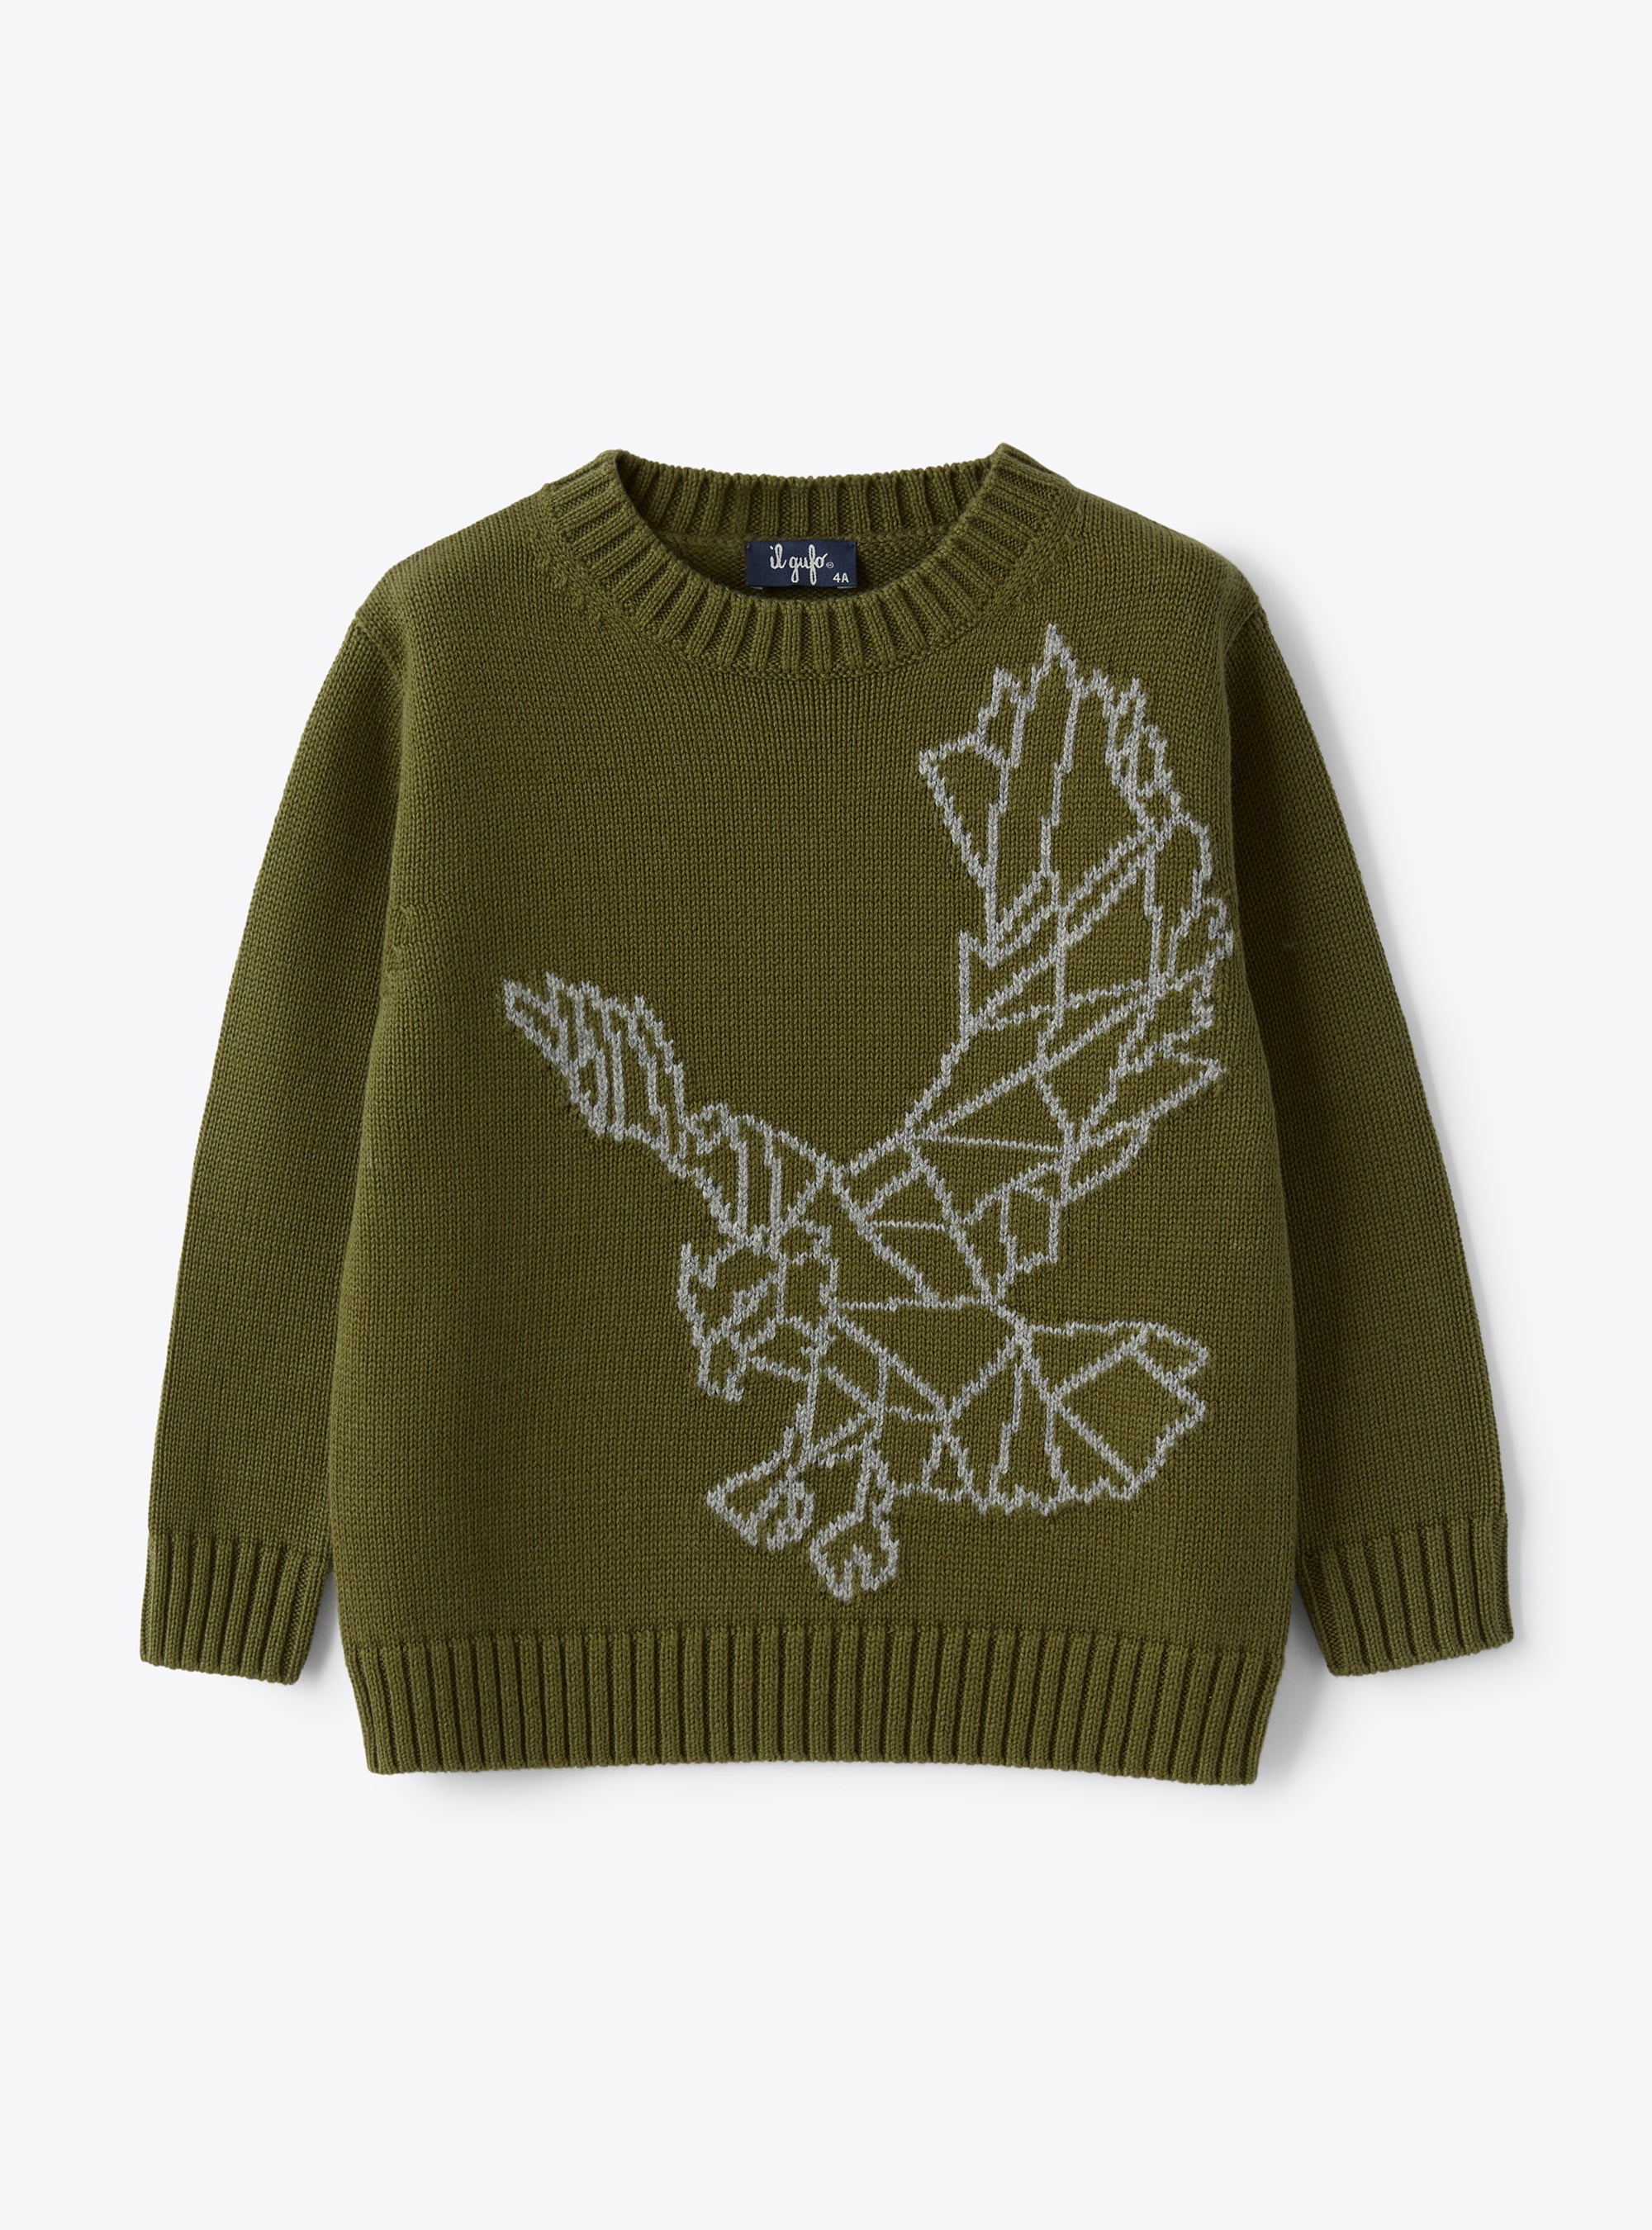 Sweater in organic olive-green cotton with an embroidered eagle - Sweaters - Il Gufo